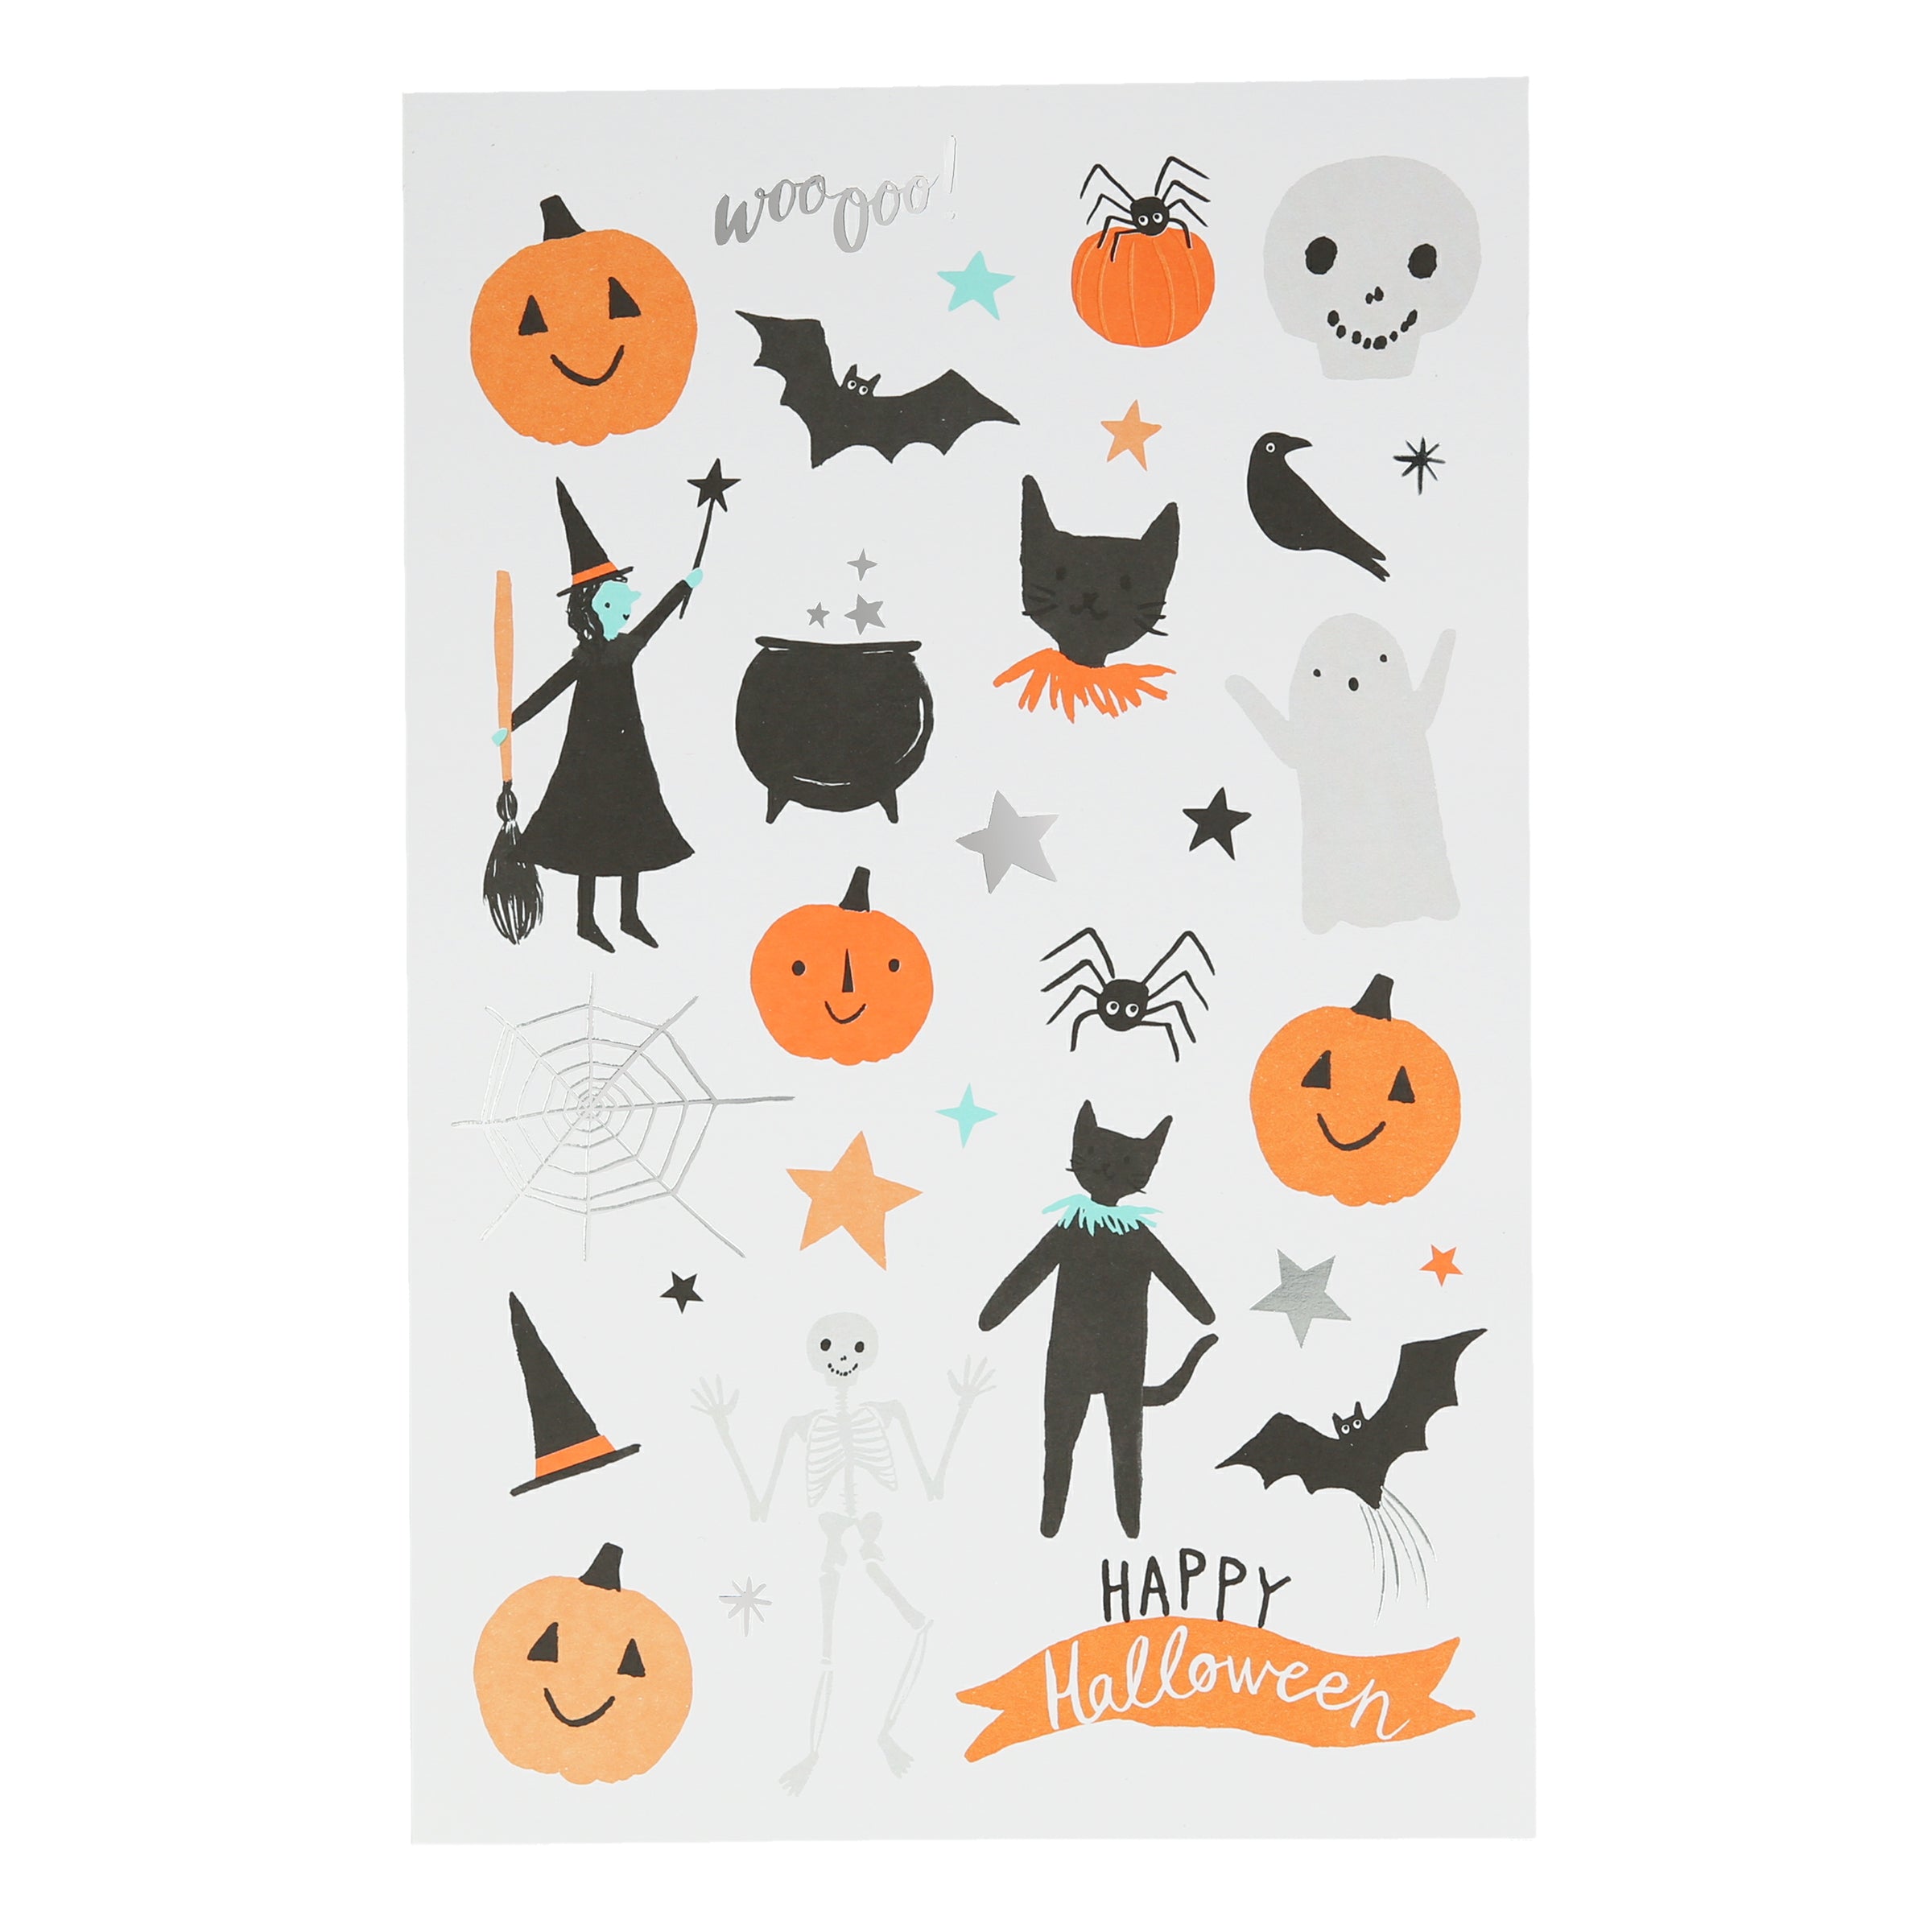 Our temporary tattoos, with Halloween characters, are perfect to add to your Halloween party supplies.